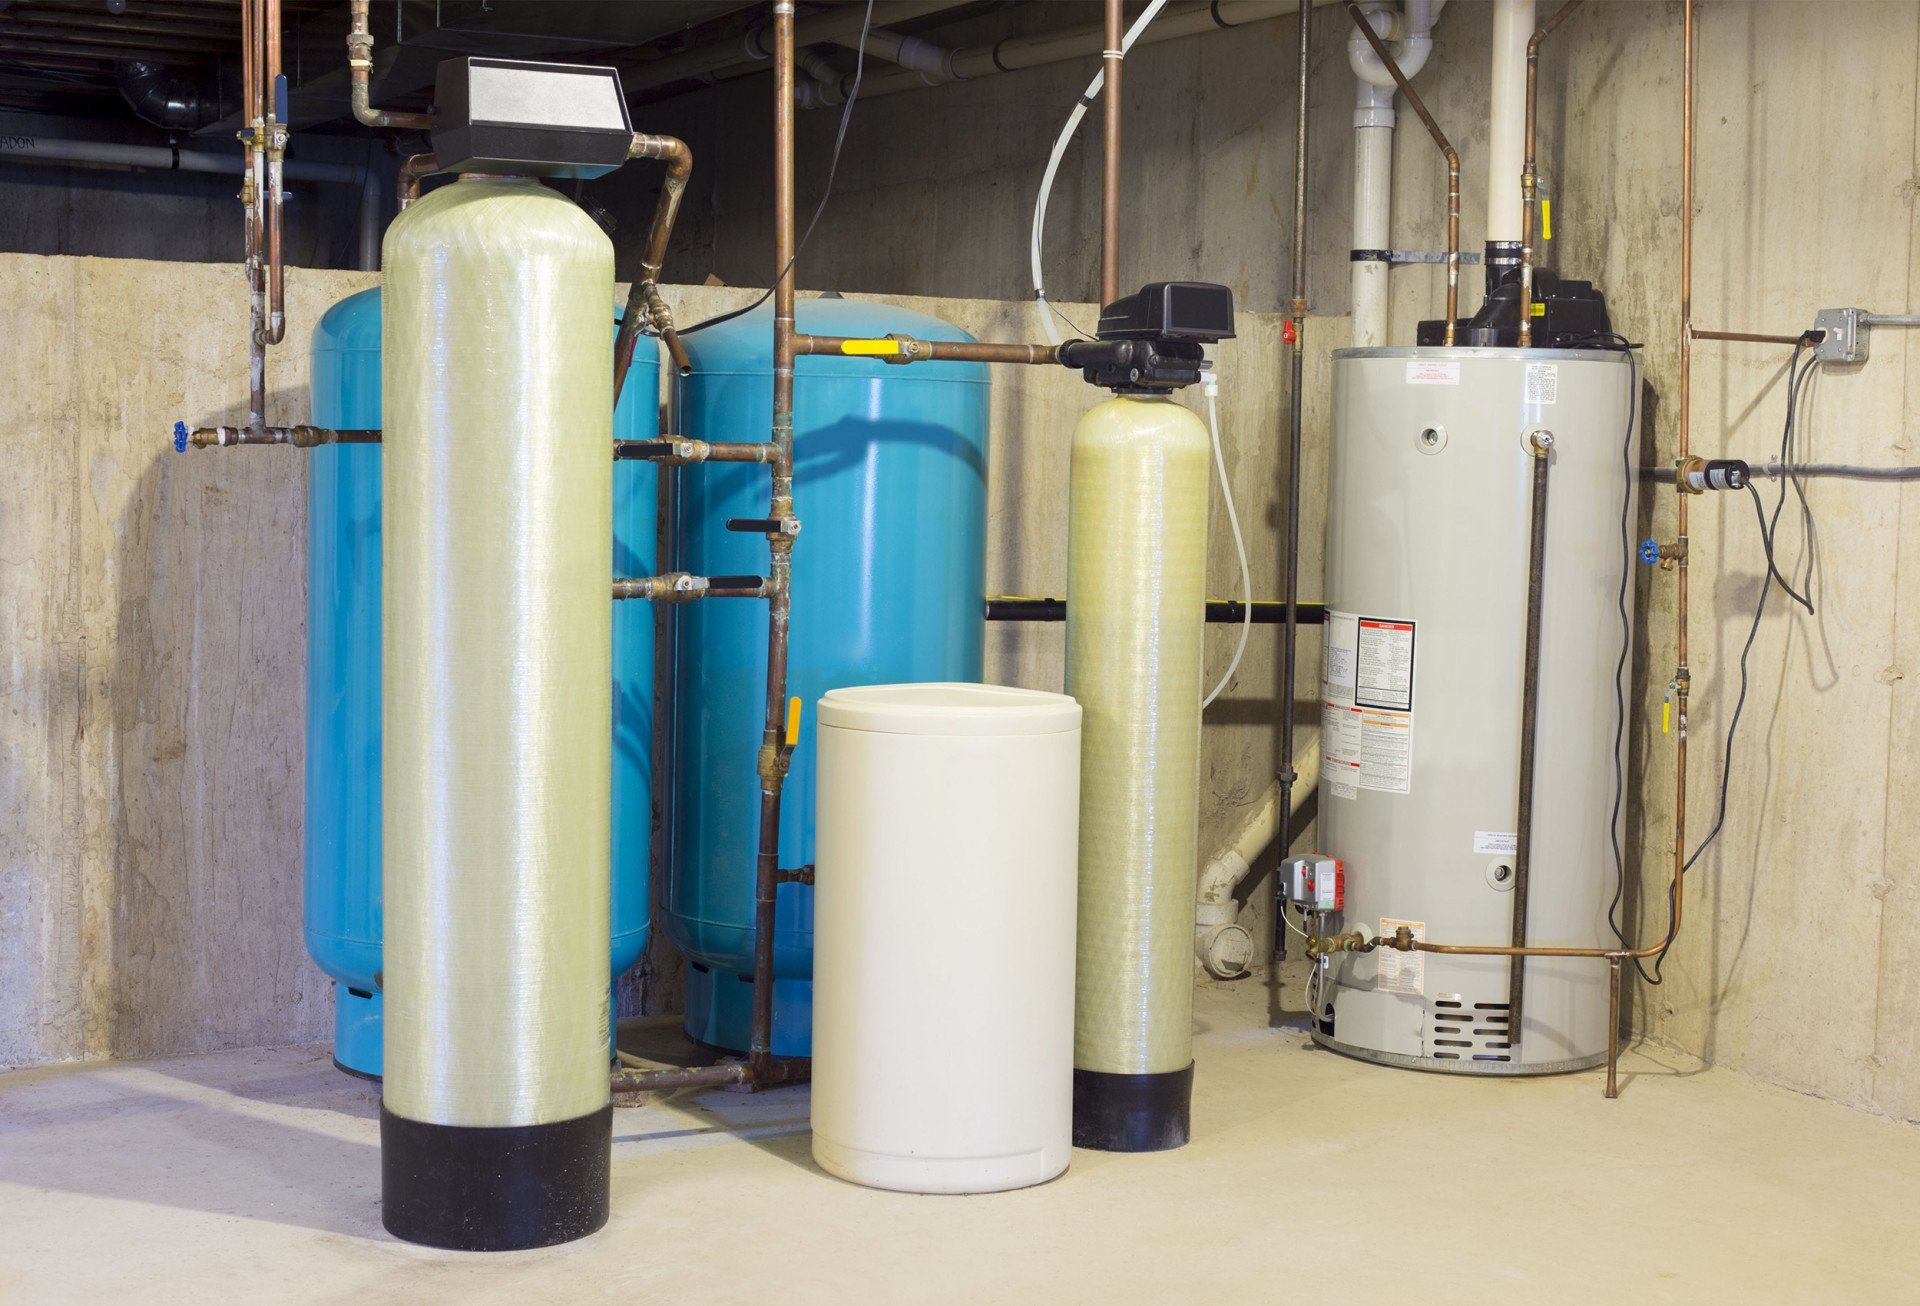 A room filled with water tanks and a water heater.